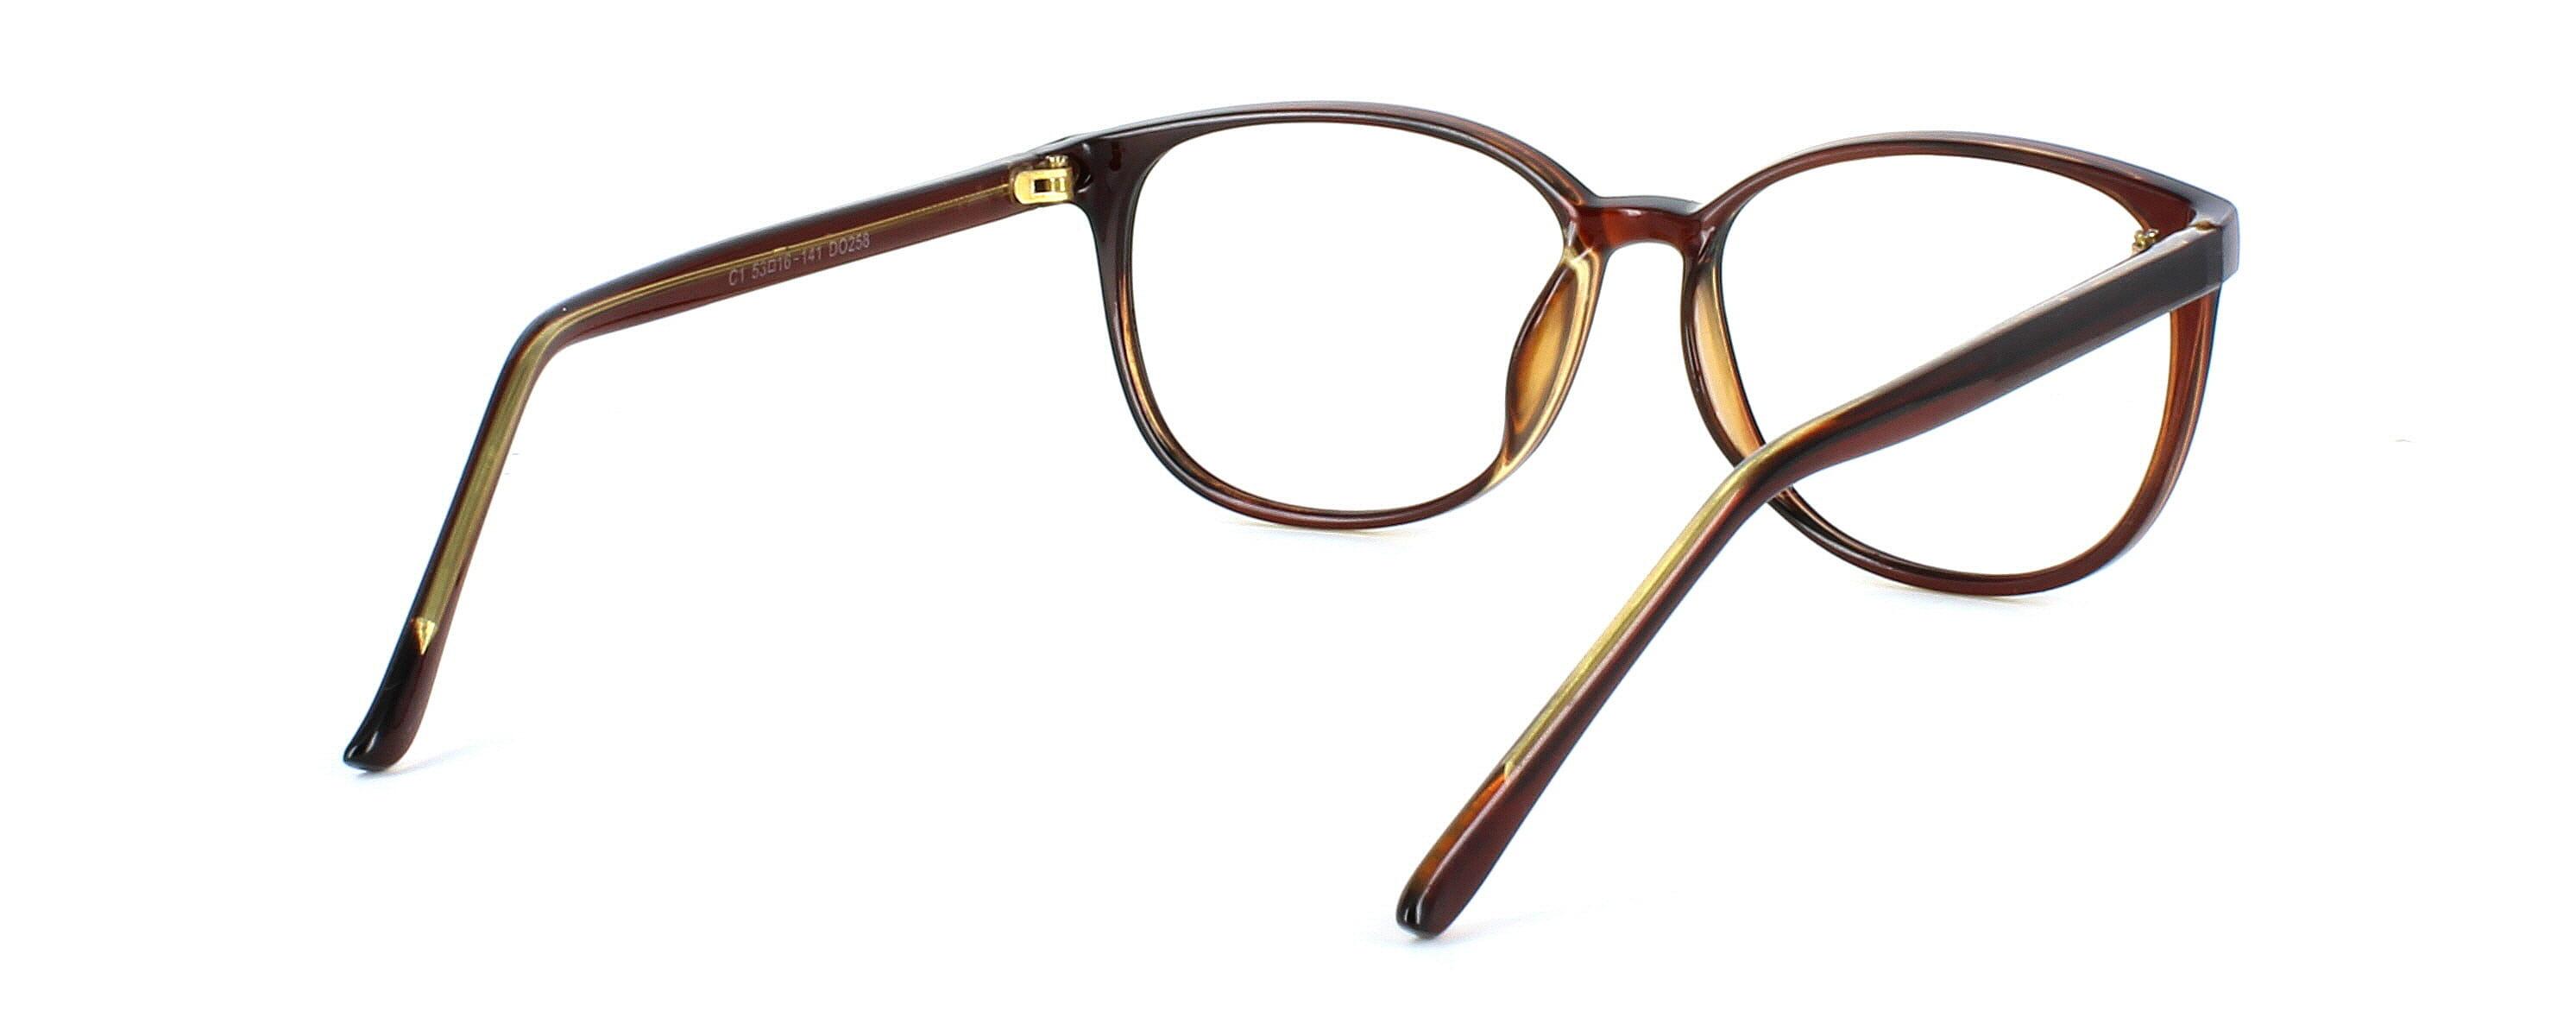 Como - Brown round shaped acetate glasses frame - image view 5